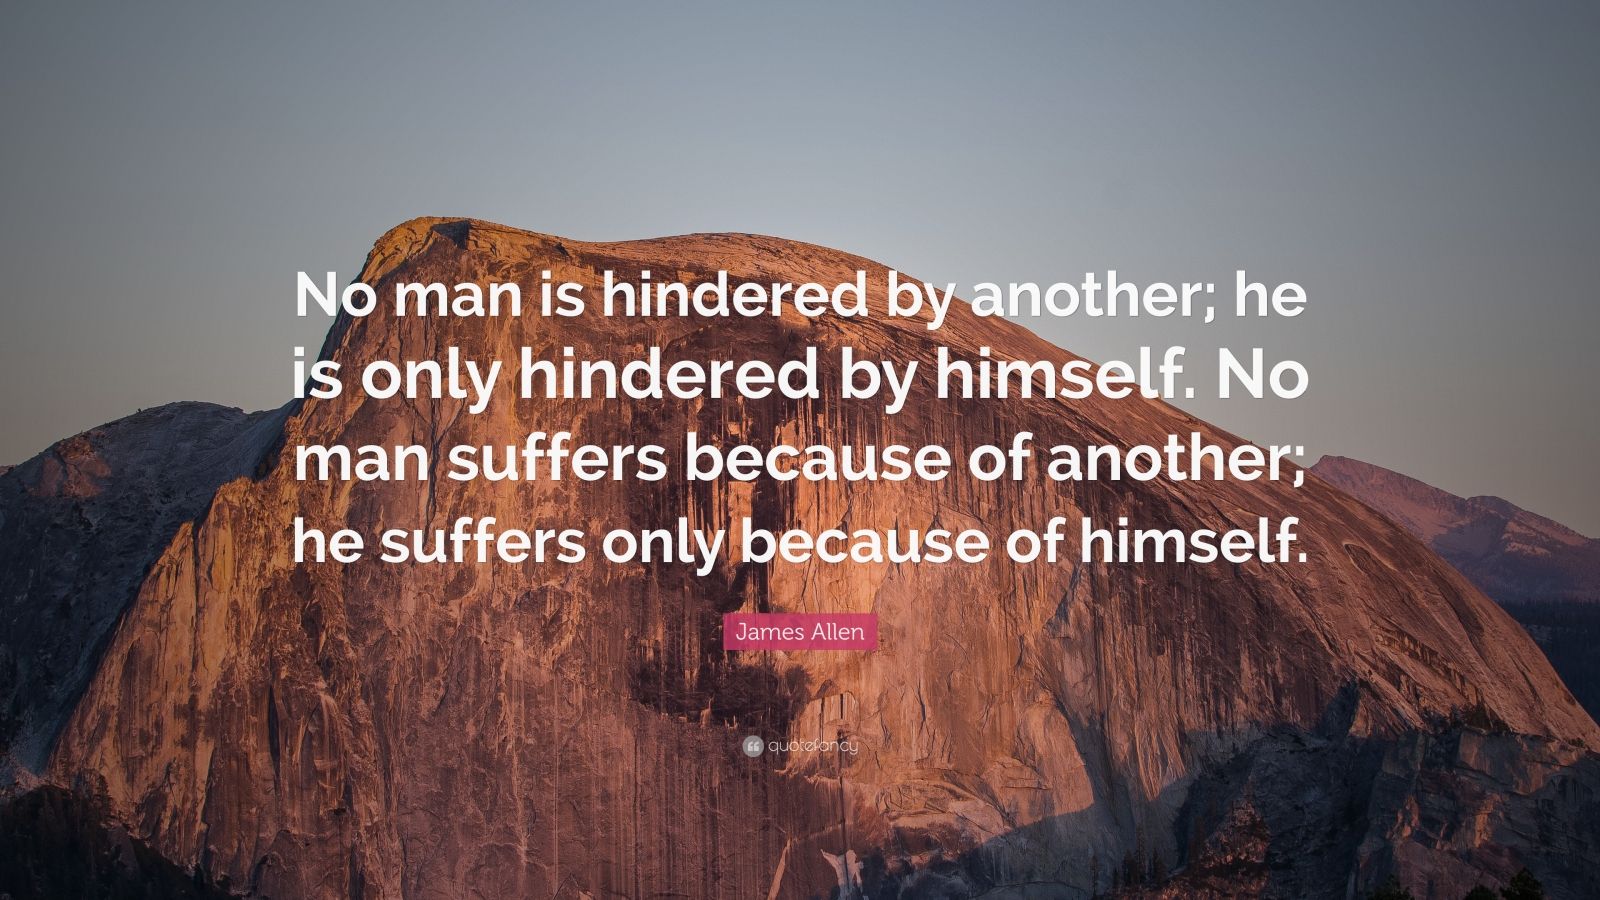 James Allen Quote: “No man is hindered by another; he is only hindered ...